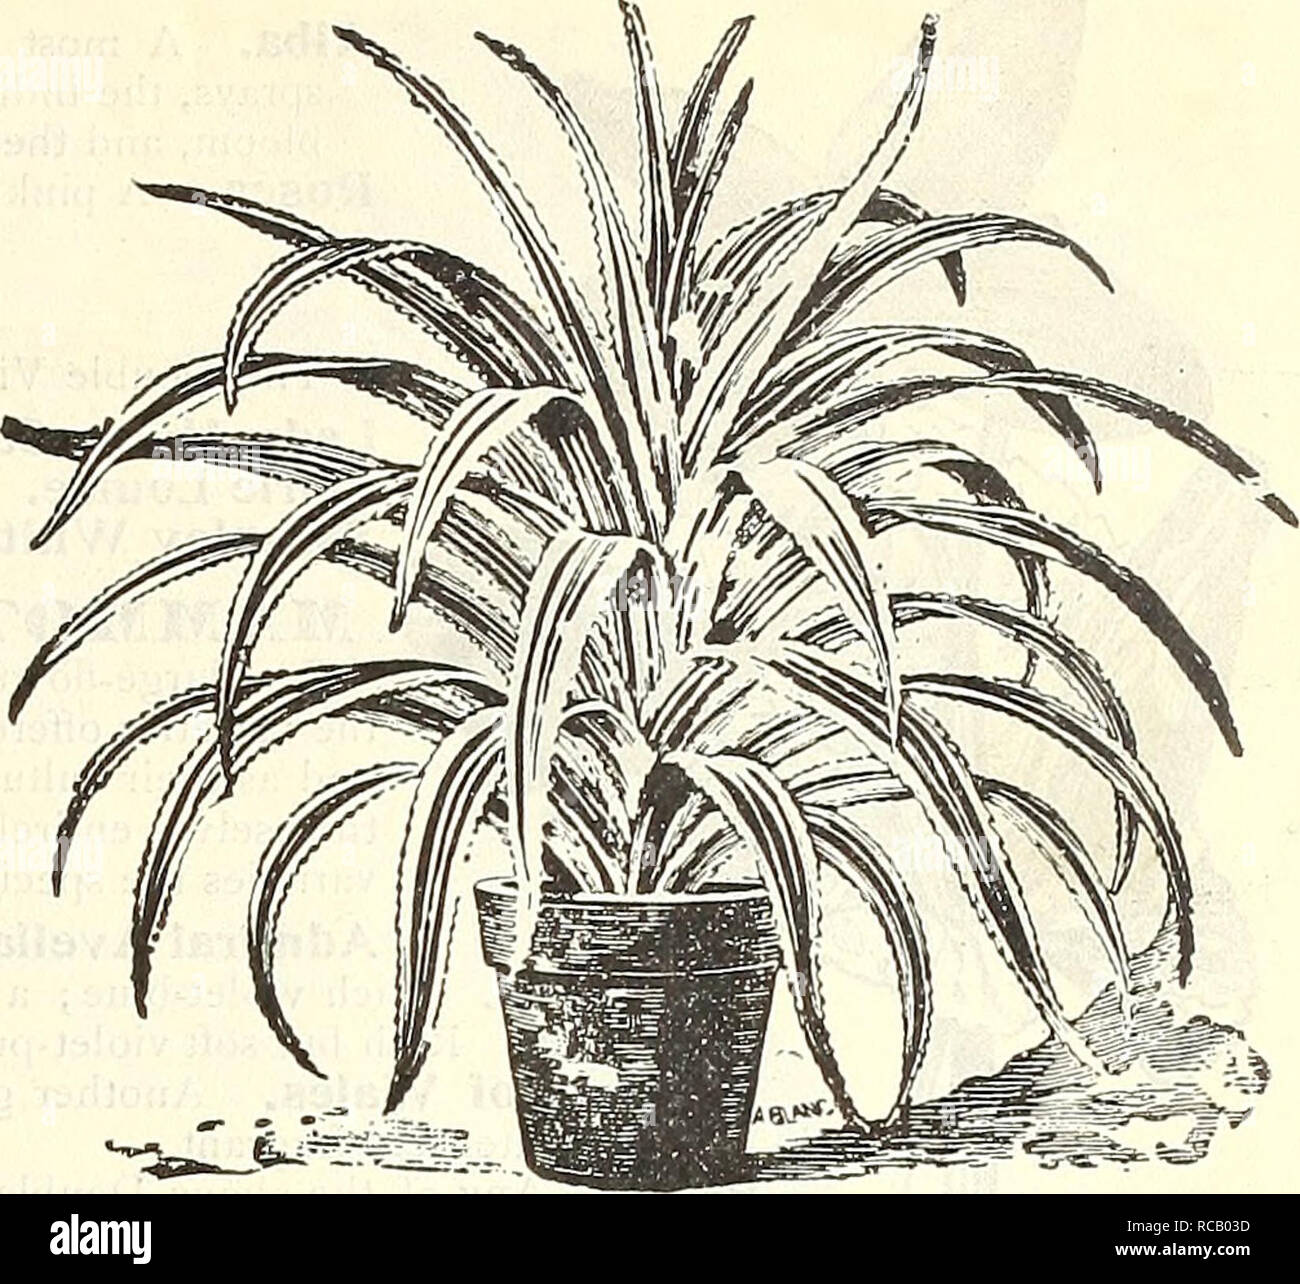 . Dreer's autumn 1902 catalogue. Bulbs (Plants) Catalogs; Flowers Seeds Catalogs; Gardening Equipment and supplies Catalogs; Nurseries (Horticulture) Catalogs; Fruit Seeds Catalogs. Preer's Autumn Catalogue, 1902. 35 MARANTA. Valuable decorative stove plants, remarkable for the richness and beauty of their foliage. Amabilis. 25 cts. each. Aurea Striata. 50 cts. each. Bella. 25 cts. each. Qoveiana. 25 cts. each. Lietzei. 25 cts. each. Makoyana. $1.00 each. Masangeana. 25 cts. each. Picta. 50 cts. each. Rosea lineata. 75 cts. each. Zebrina. 50 cts. each. METROSIDEROS. Fioribunda {Bottle Brush).  Stock Photo